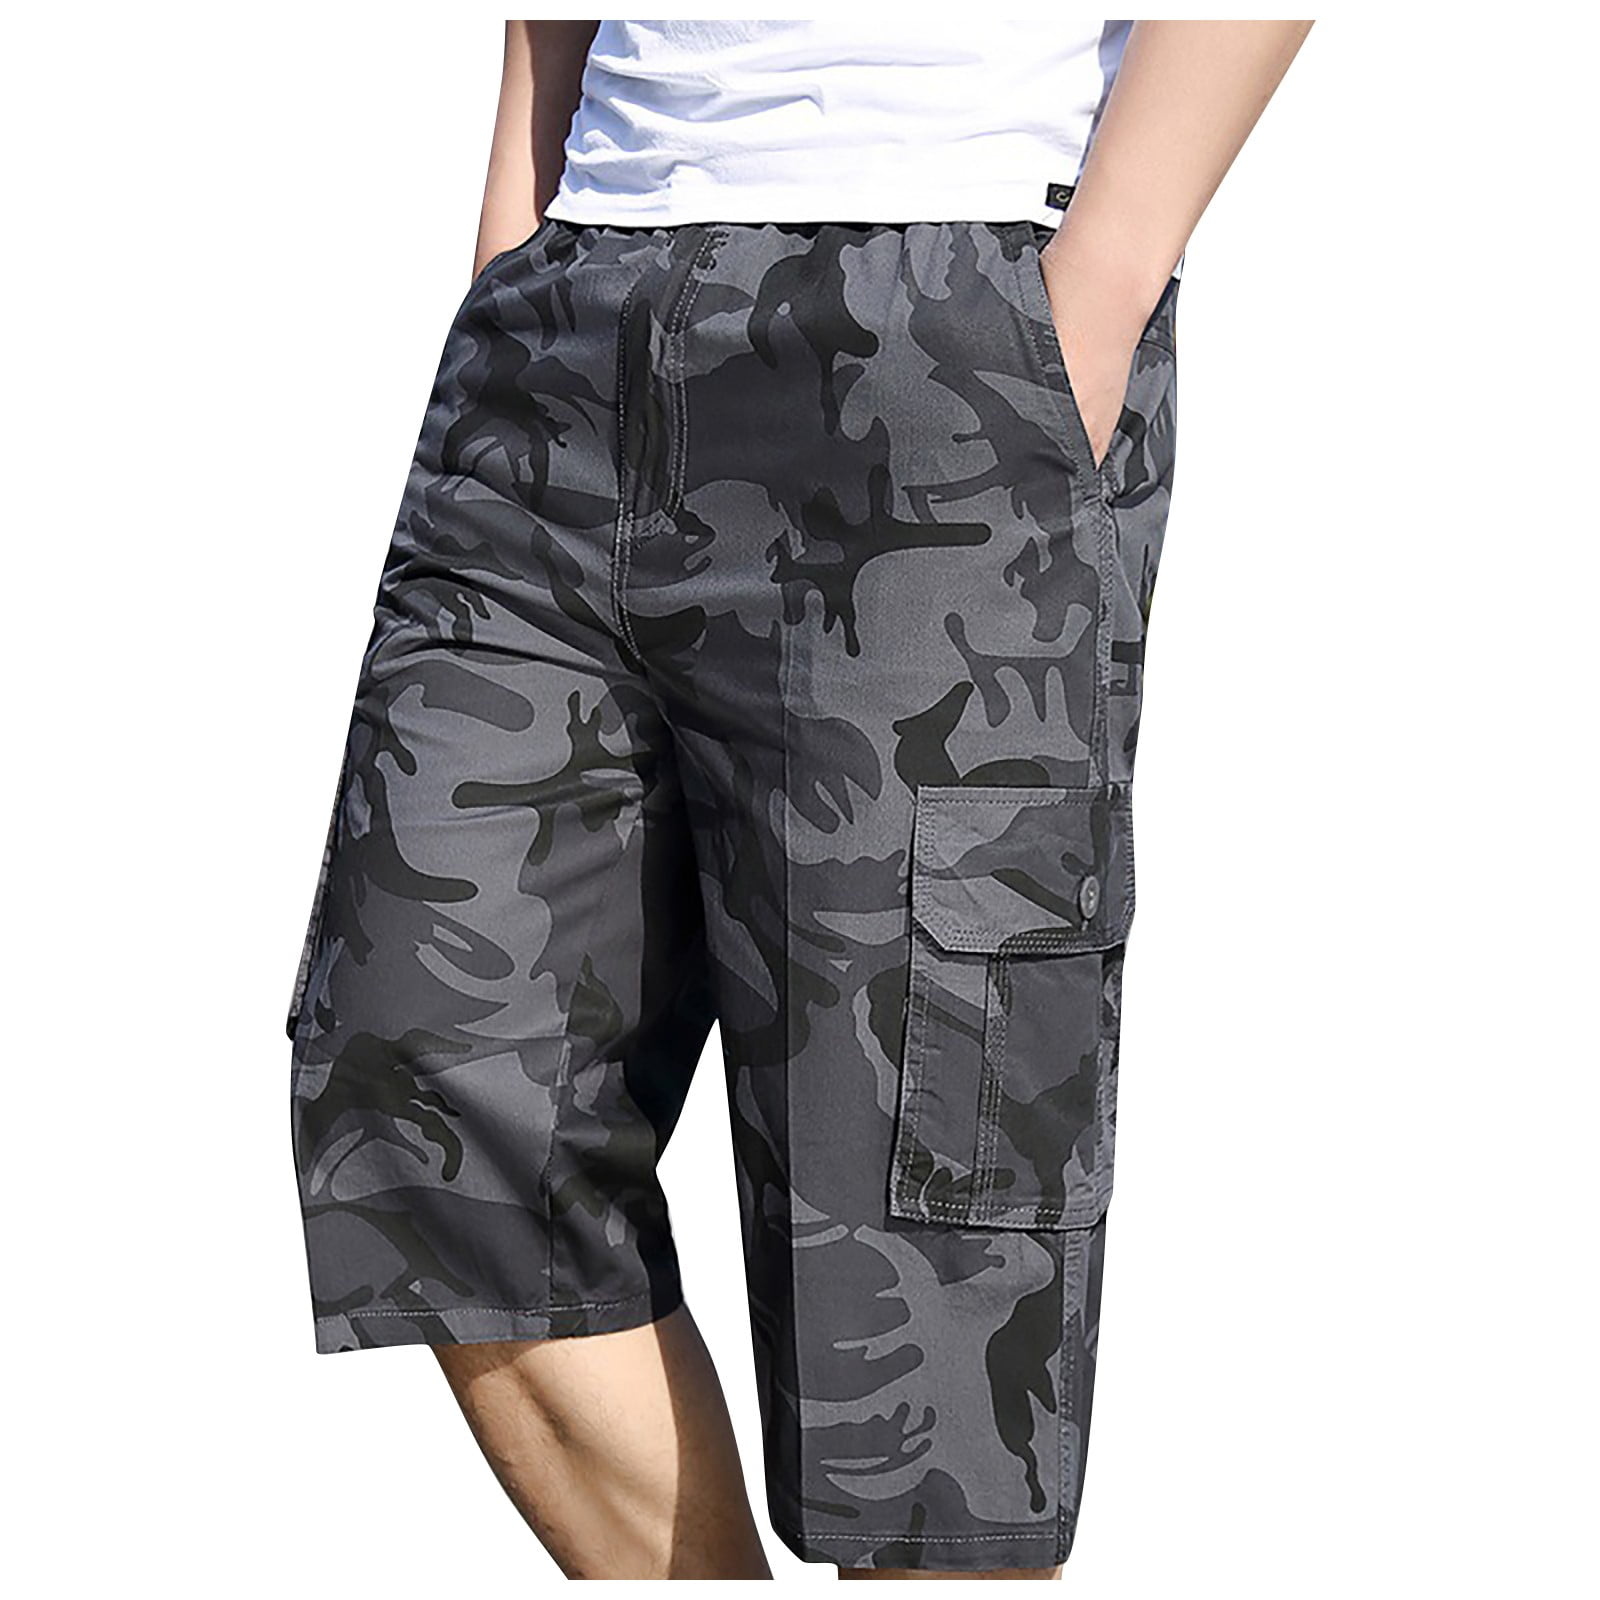 JWZUY Men's Cargo Shorts Relaxed Fit Camo Short Outdoor Multi